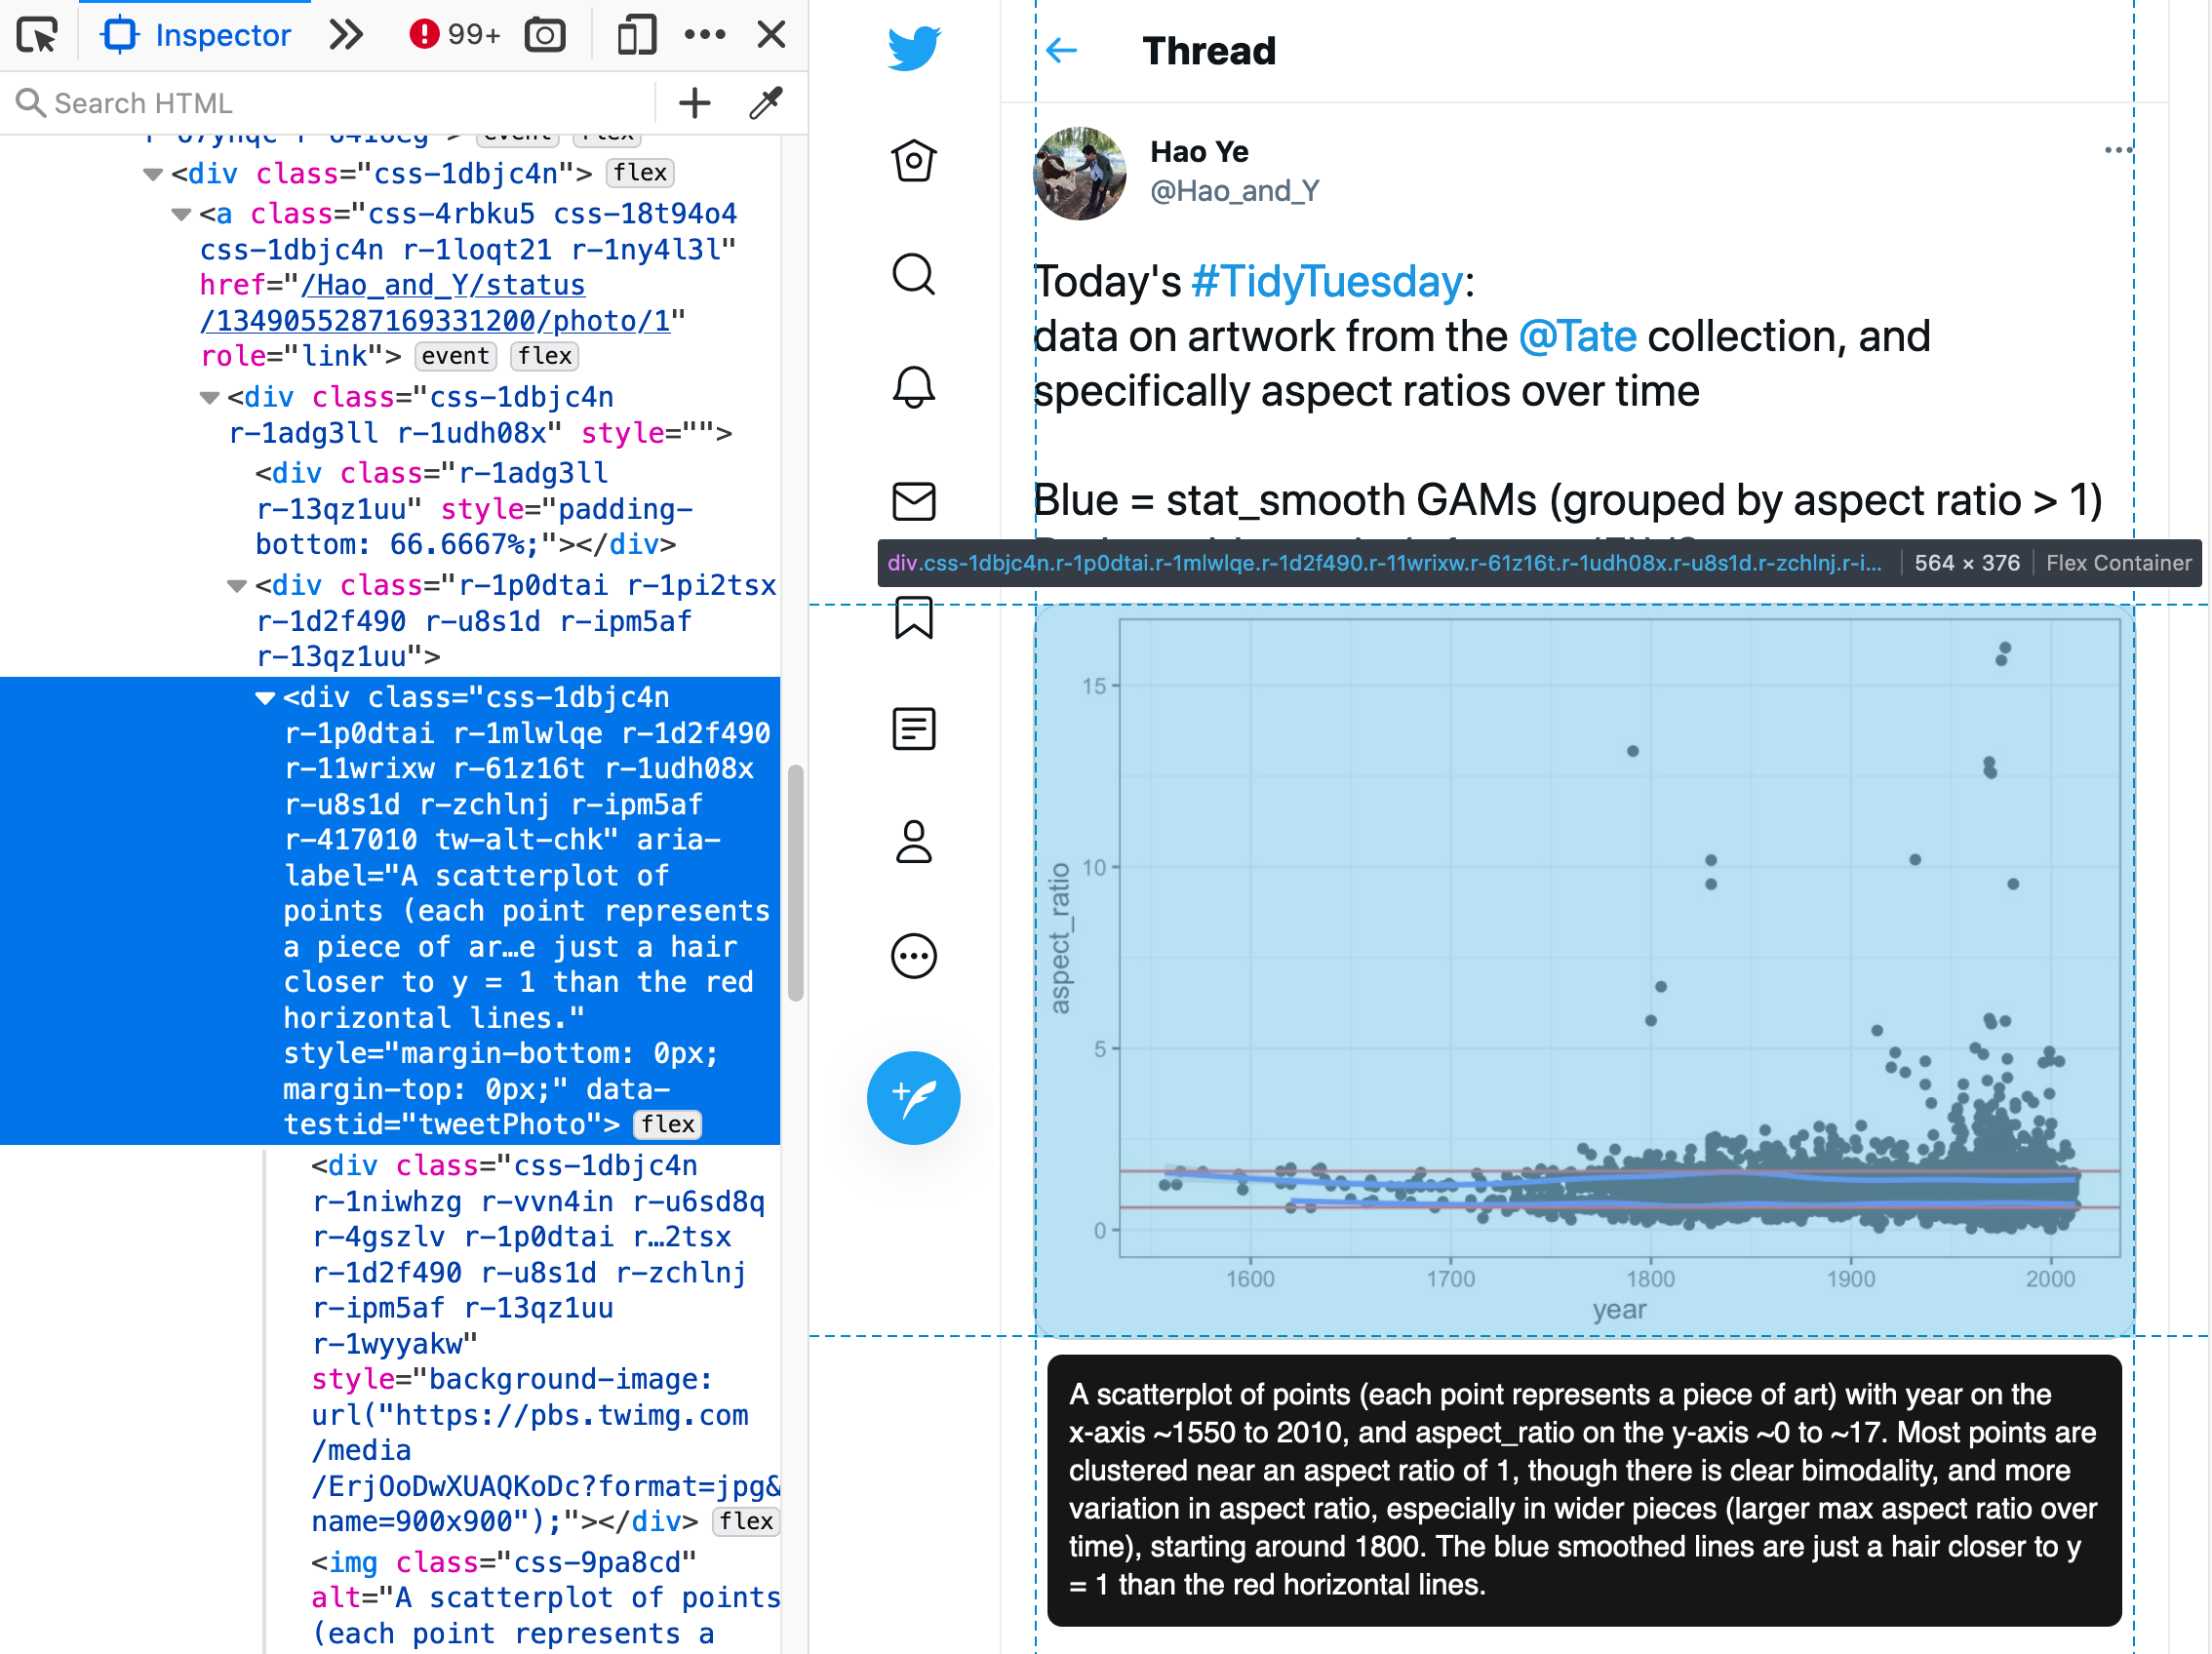 Web inspection tool being used to identify the CSS selector corresponding to the primary image of one of Hao Ye's (@Hao_and_Y) tweets with alt text